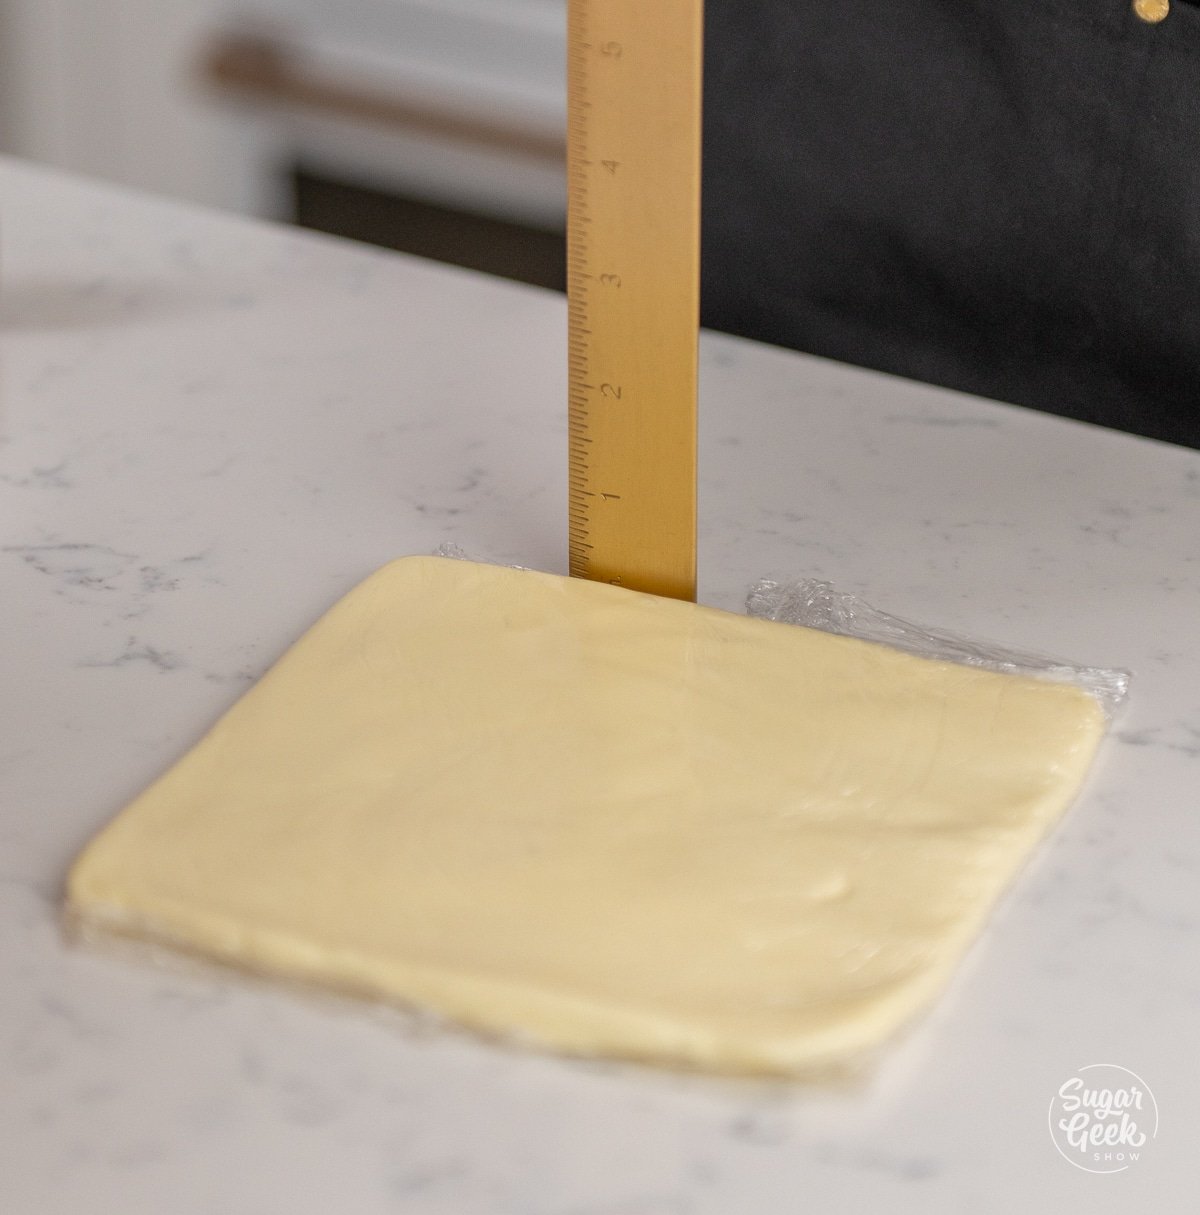 ruler measuring the thickness of a butter block